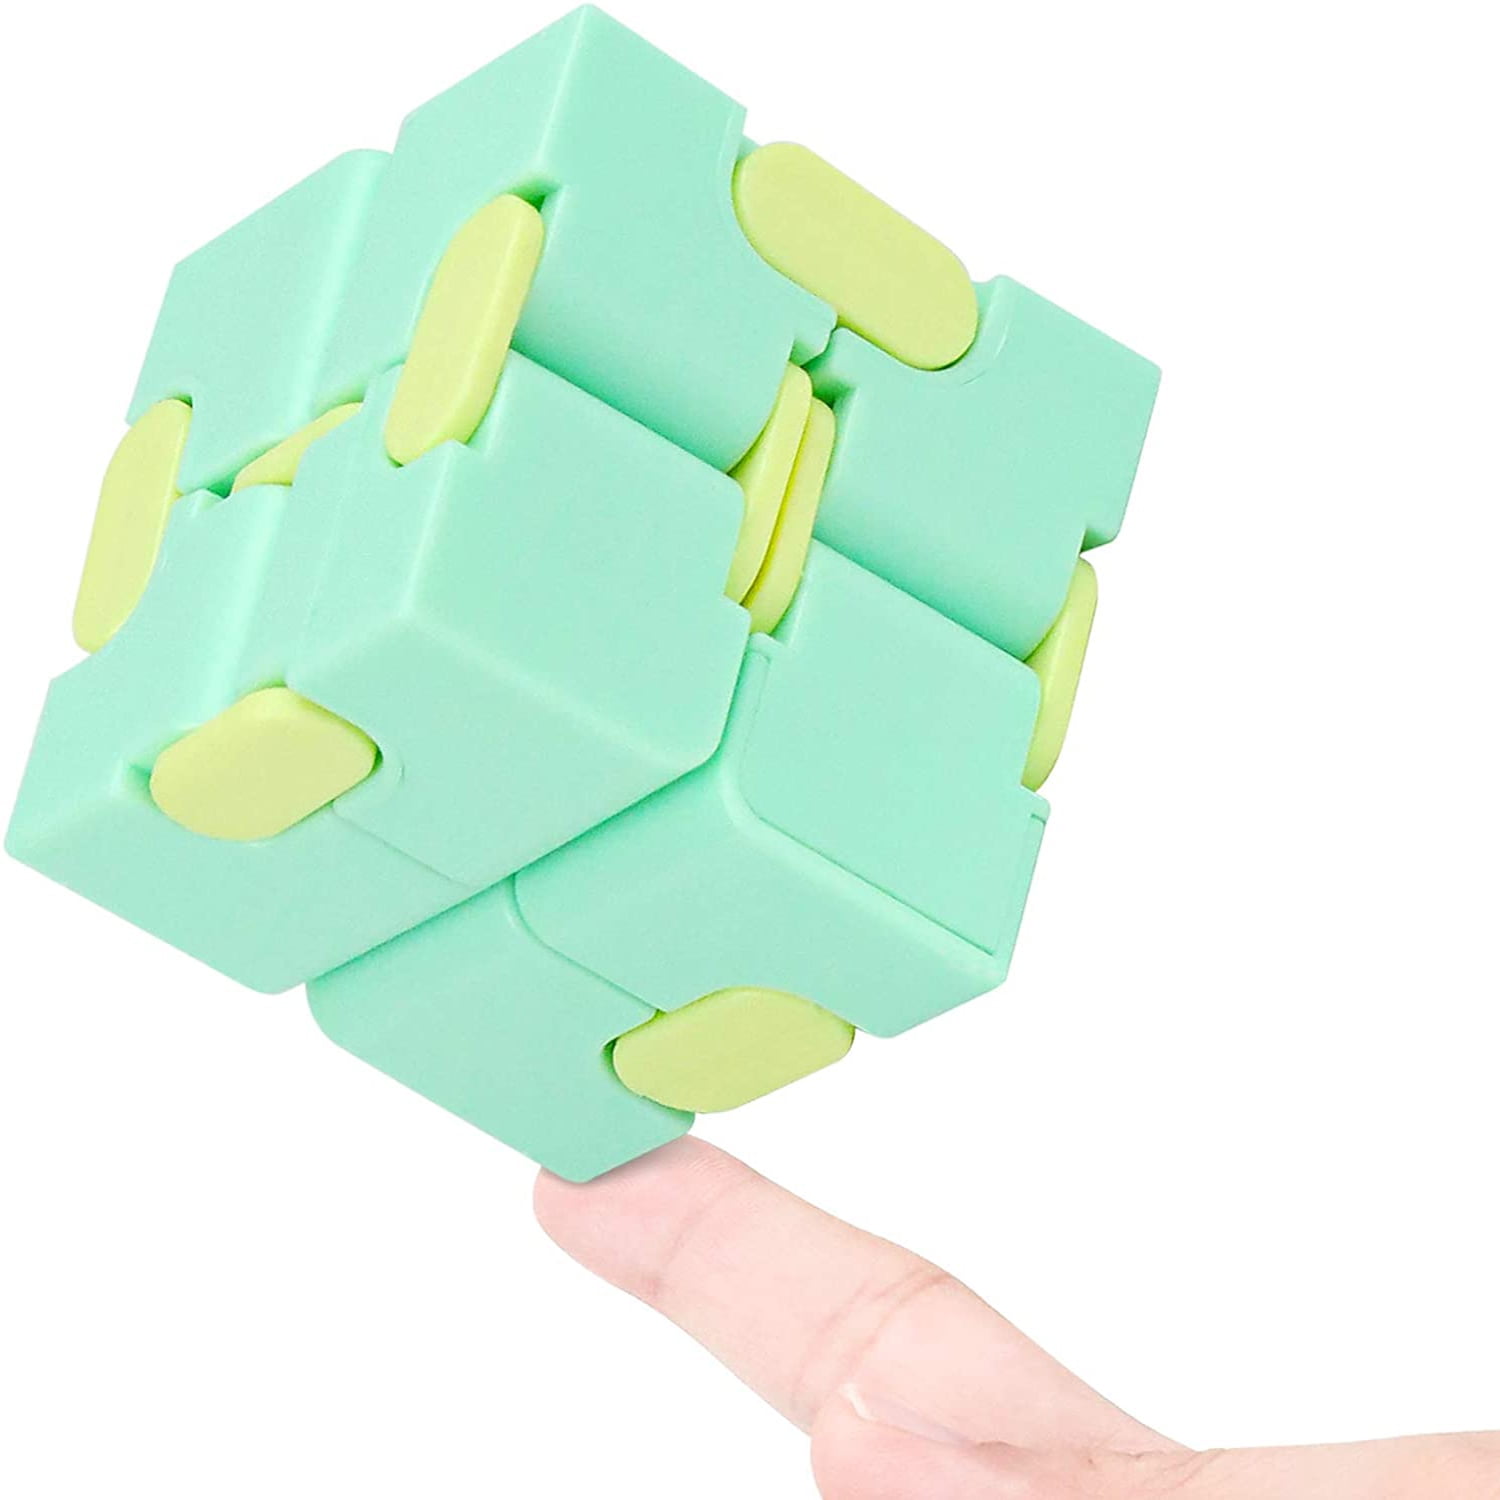 Funxim Infinity Cube Fidget Toy Glossy EDC Fidgeting Game for Kids and Adults, 